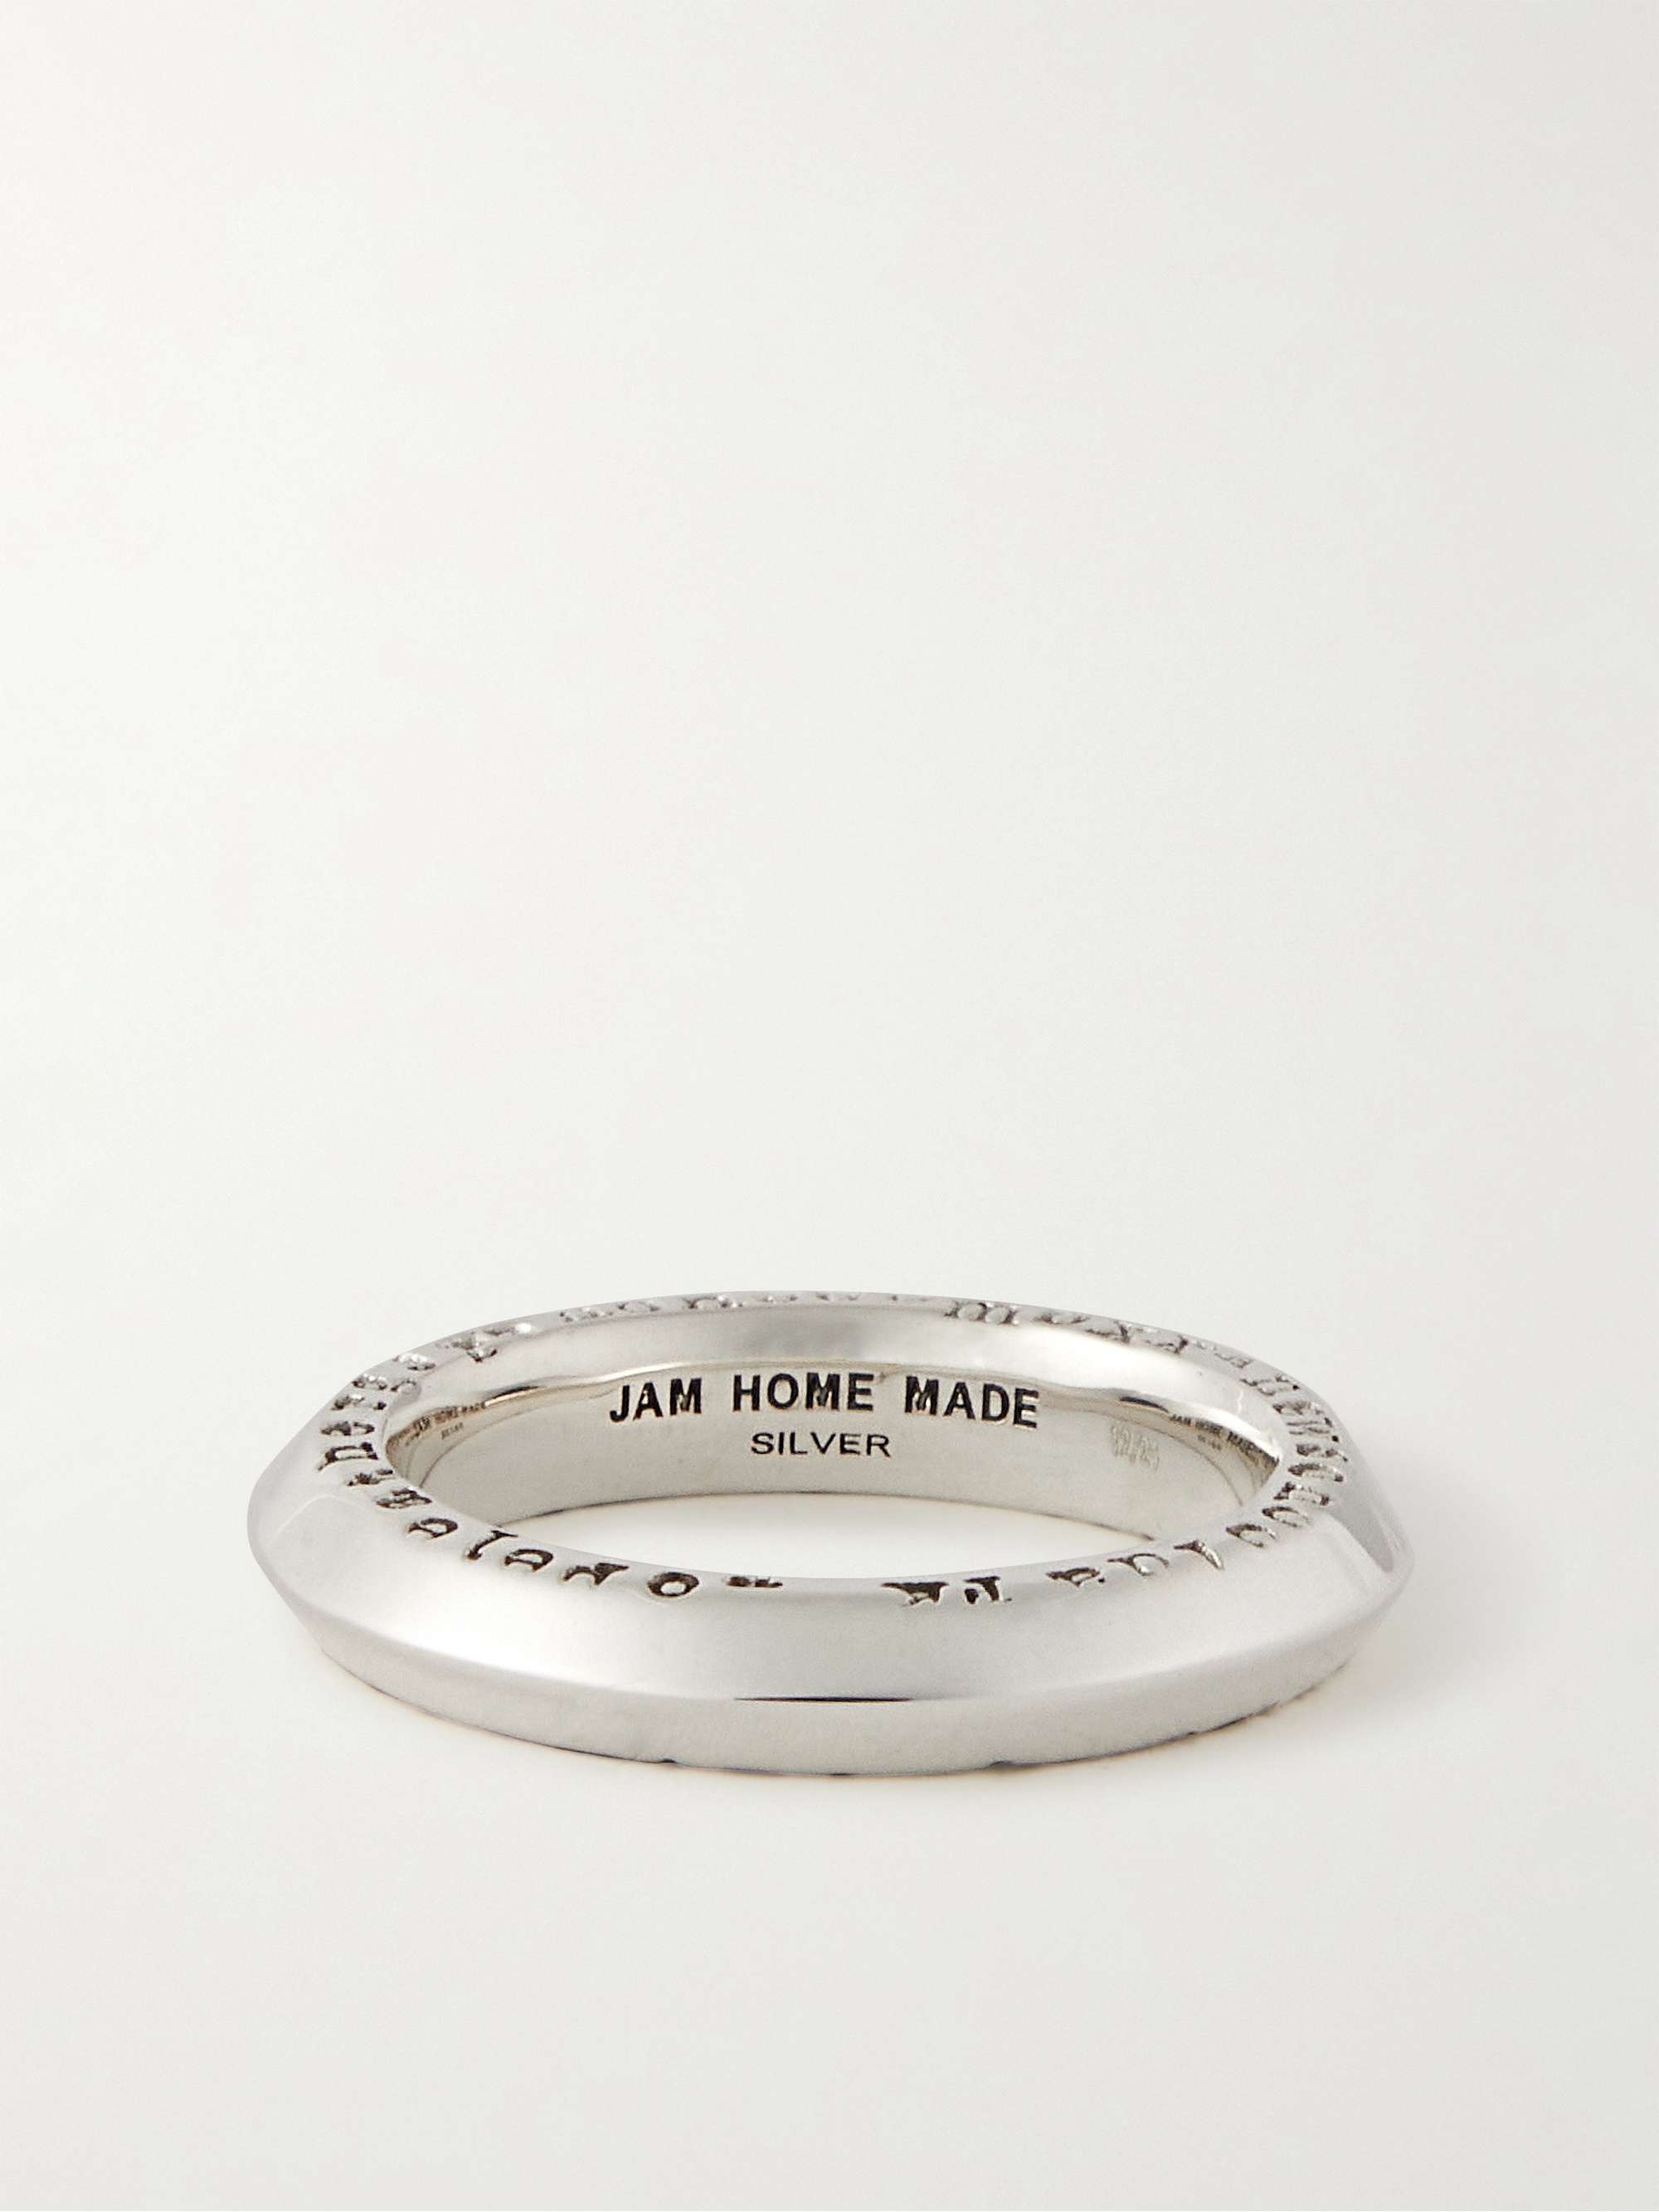 JAM HOMEMADE 15th Neo Small Engraved Sterling Silver Ring